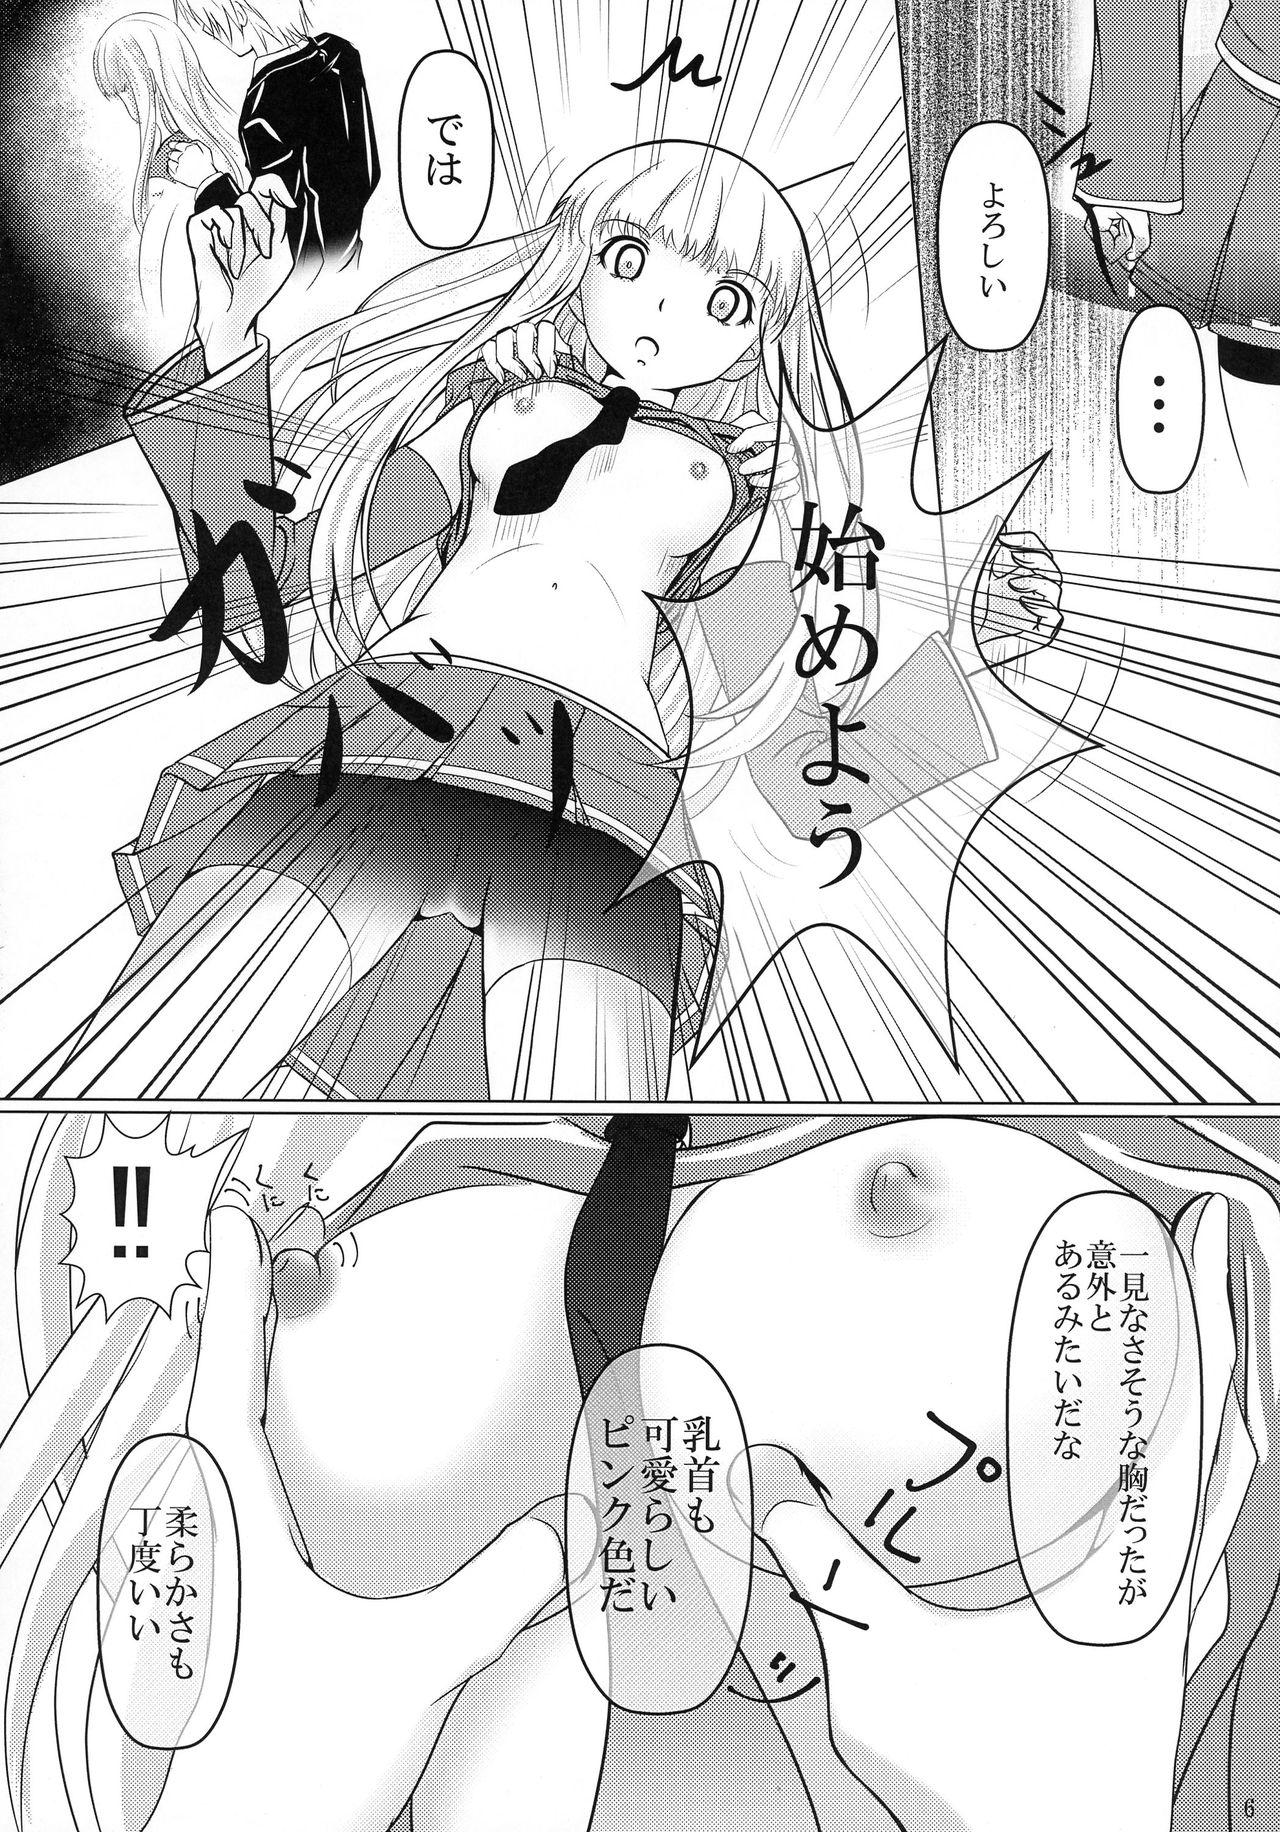 Hot Girl CONFIDENTIAL - Arpeggio of blue steel Assfucking - Page 6